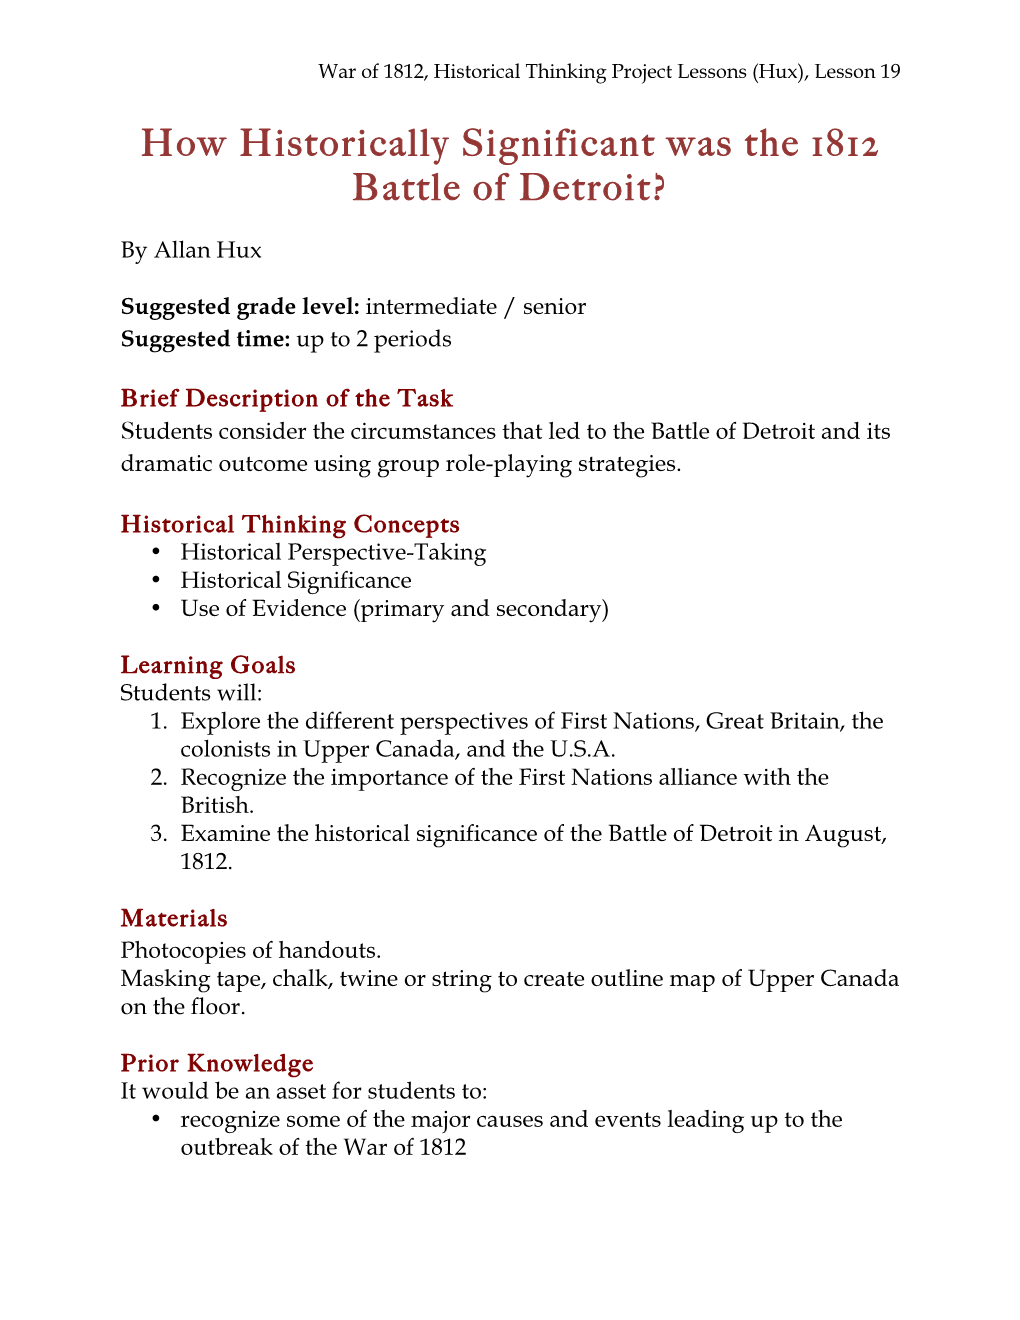 Significance of the Battle of Detroit in August, 1812